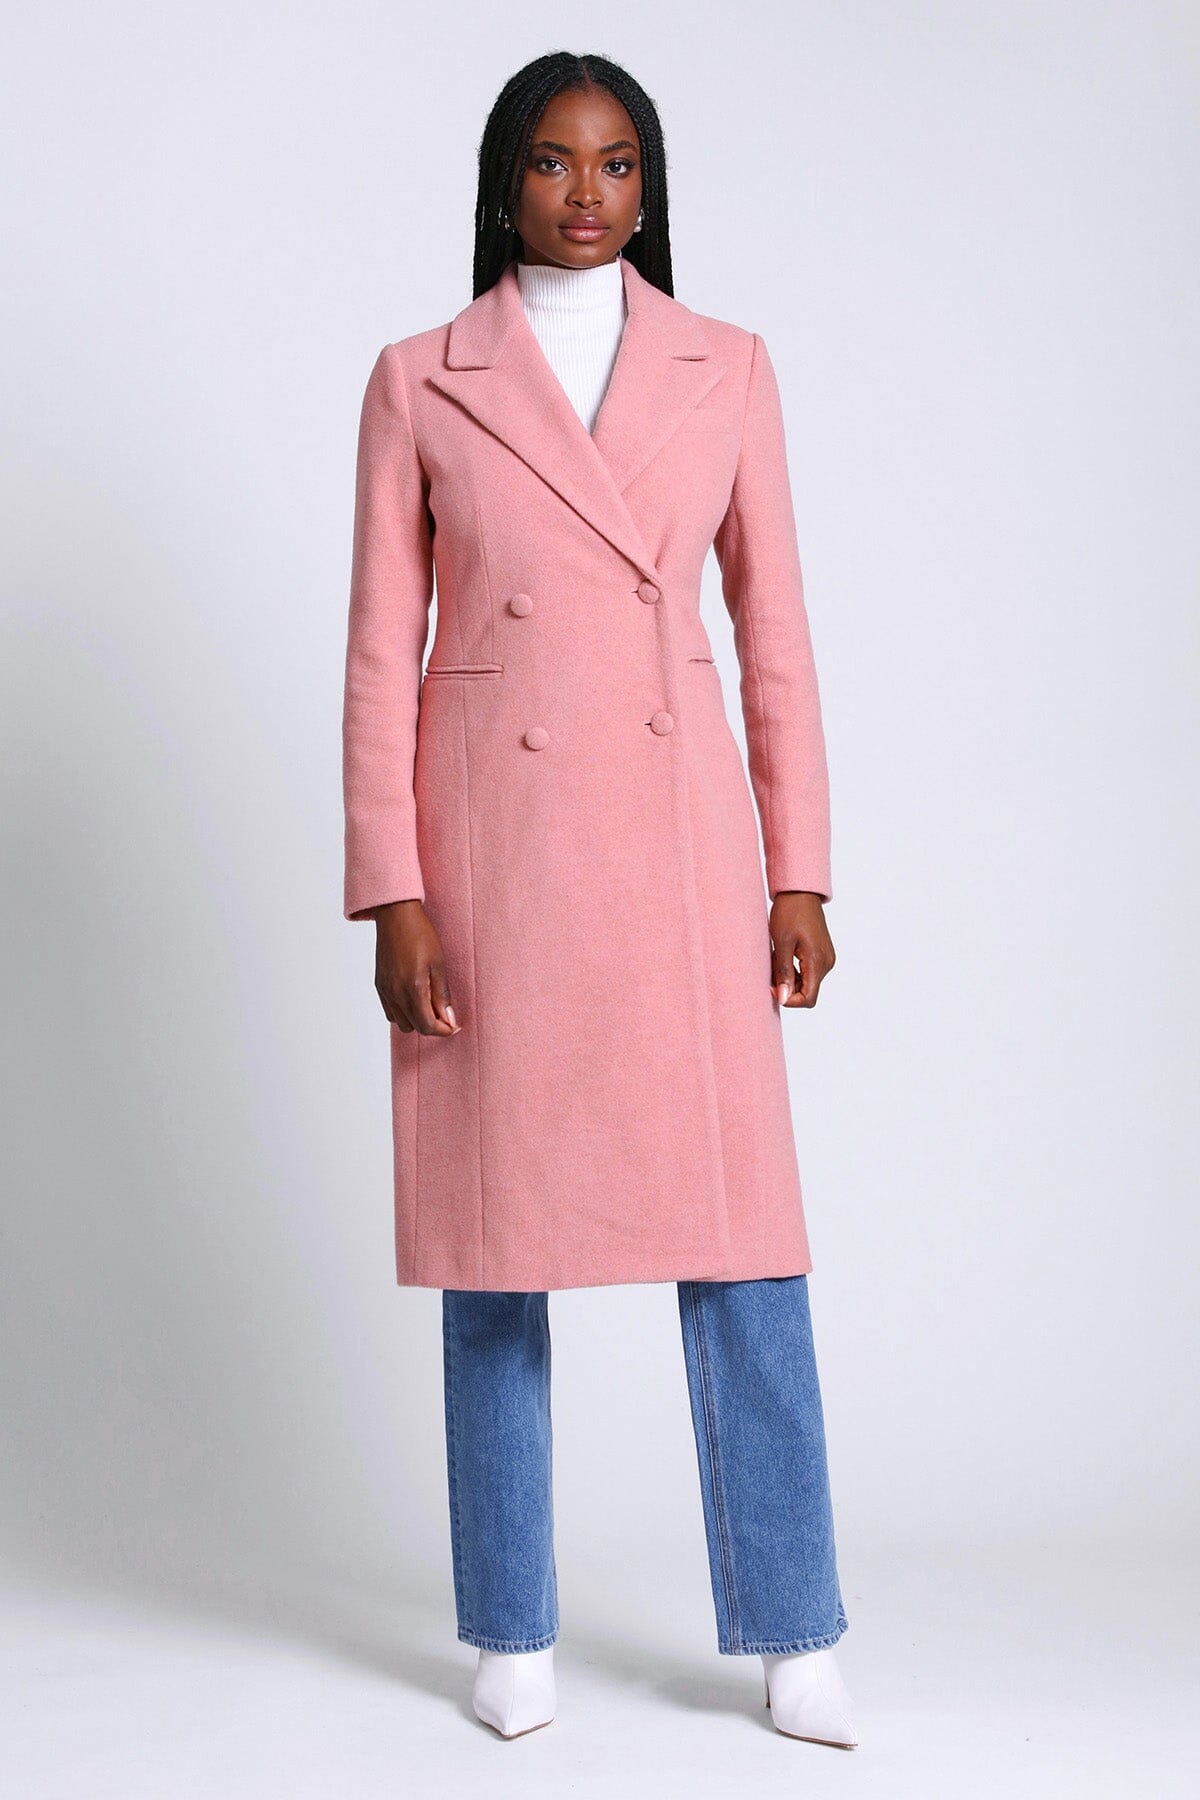 Rose pink tailored double breasted long coat jacket - women's figure flattering casual to dressy coats jackets for fall winter fashion